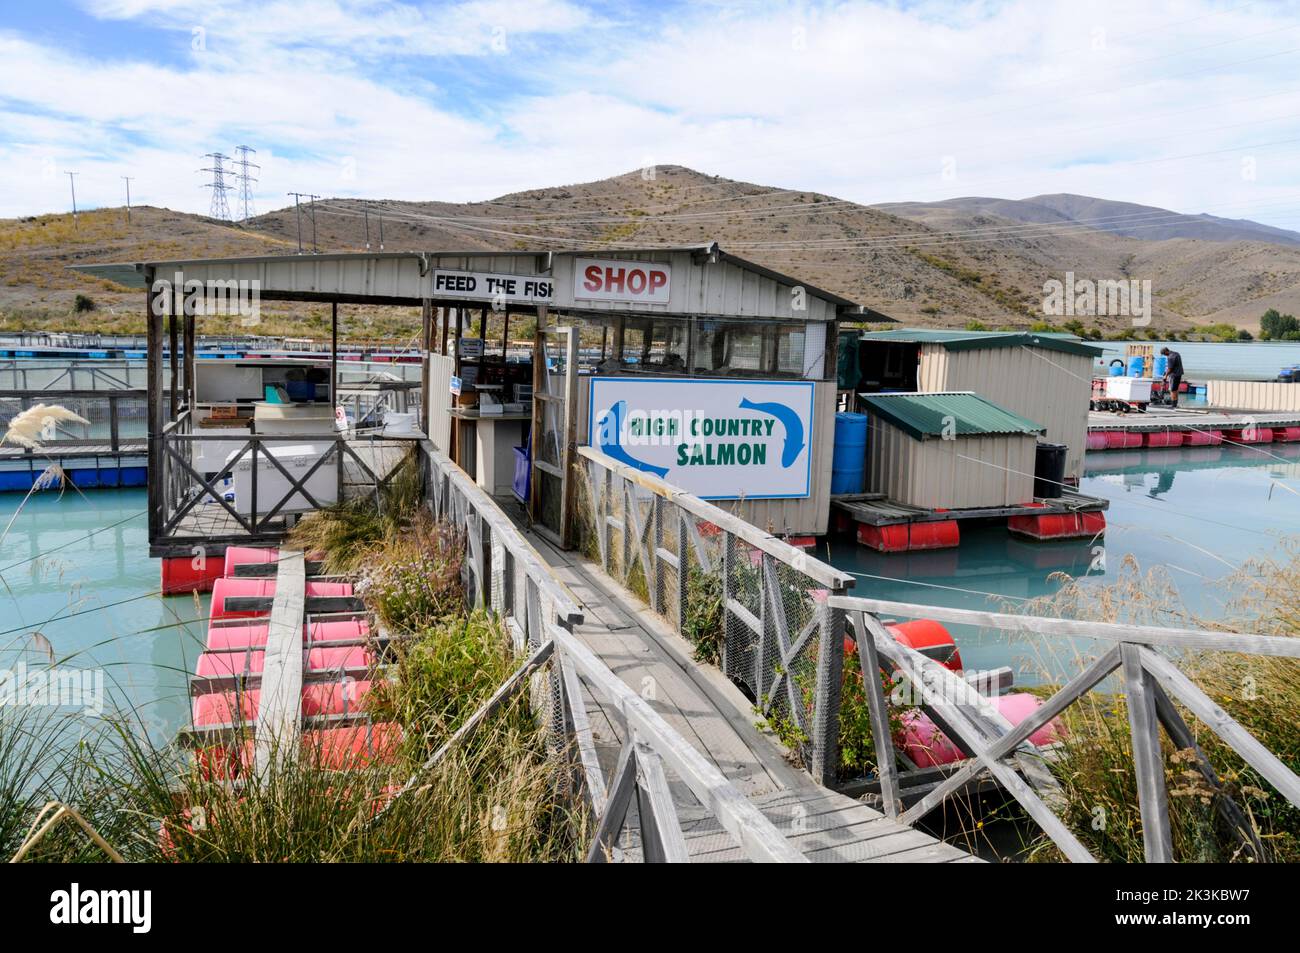 A family-run salmon farm, High Country Salmon on the Pukaki-Tekapo canal where visitors can feed the fish in their pens and purchase salmon products s Stock Photo